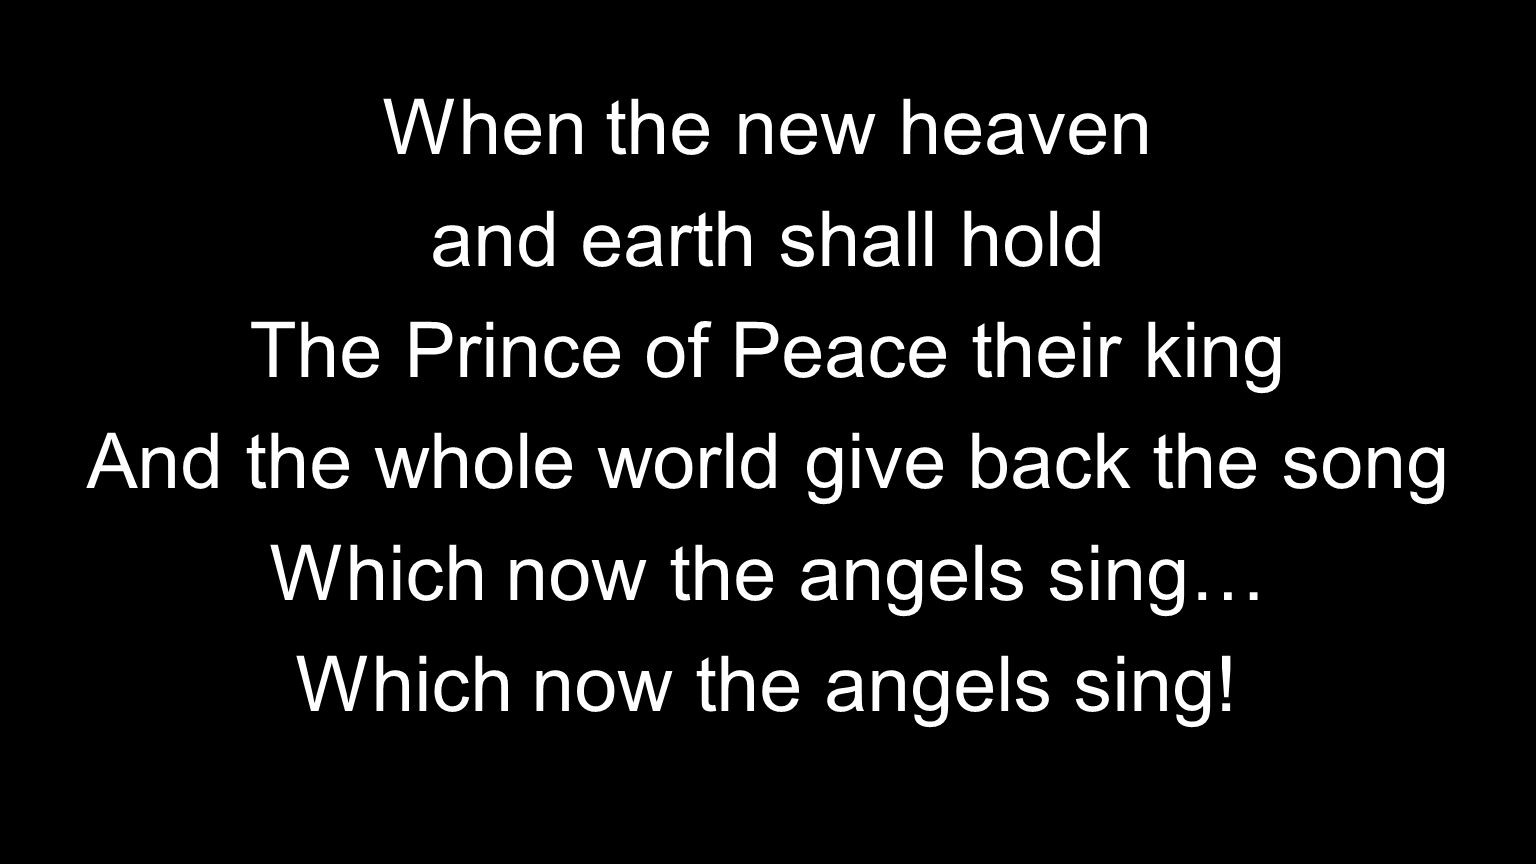 The Prince of Peace their king And the whole world give back the song